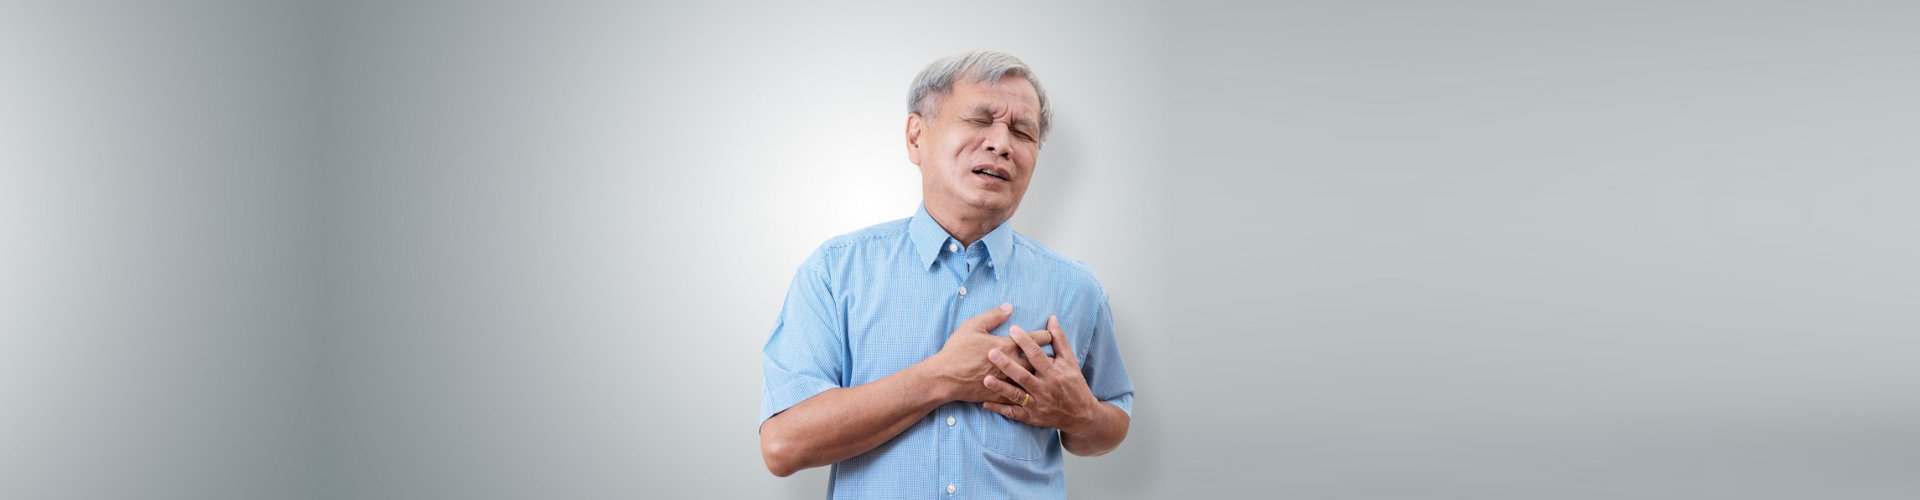 senior man clutching and having chest pain cause of heart attack